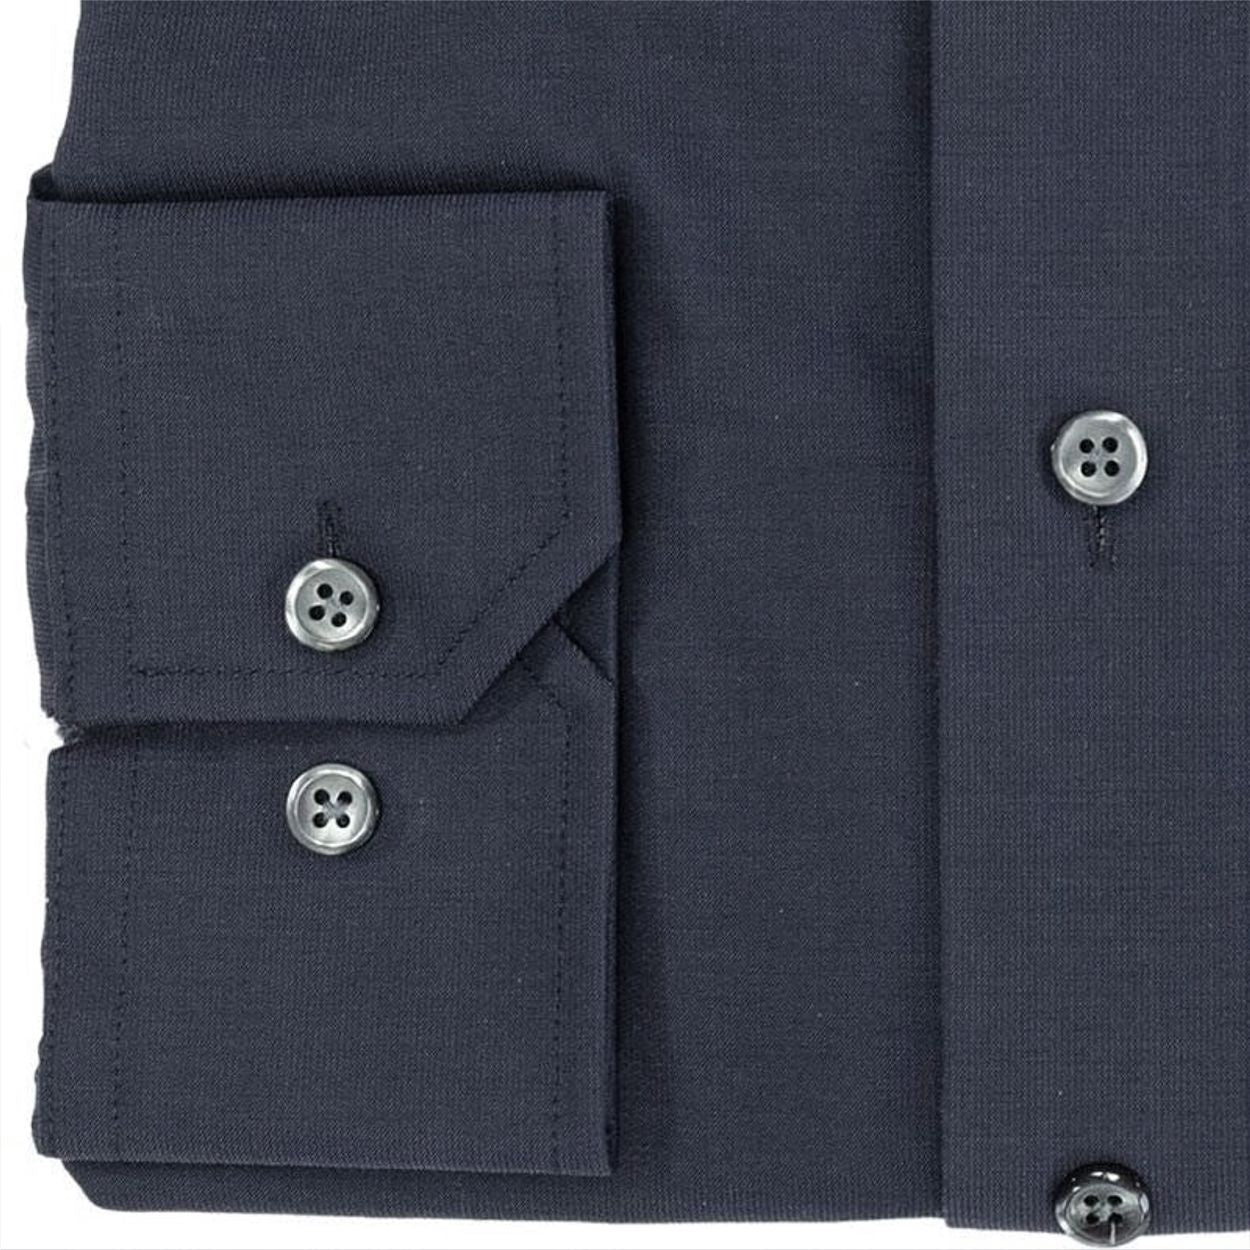 No-Iron Cotton Dress Shirt with Spread Collar in Oxford Blue (Regular Fit) by Leo Chevalier